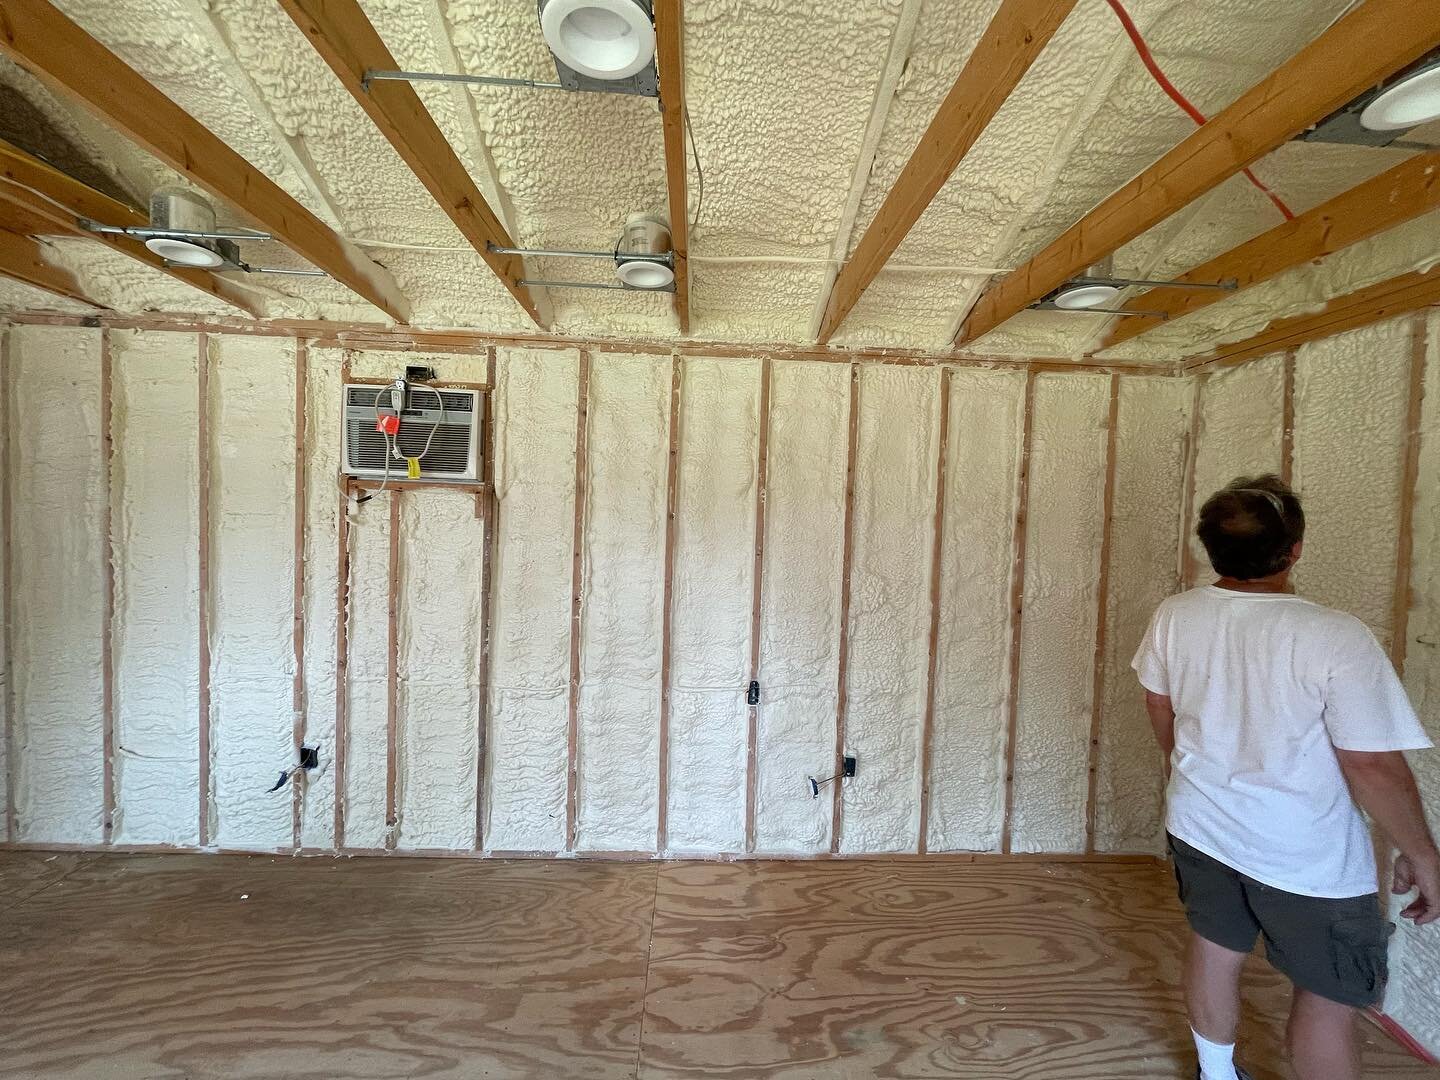 HandiFoam HVLP 2.0lb closed cell foam to help make this shed ready to be a finished space.. #sprayfoam #sprayfoaminsulation #insulation #afterpenc #handifoam #hvlp #buildingperformance #performancematters #sys @sprayfoamsystems @joshwinkler76